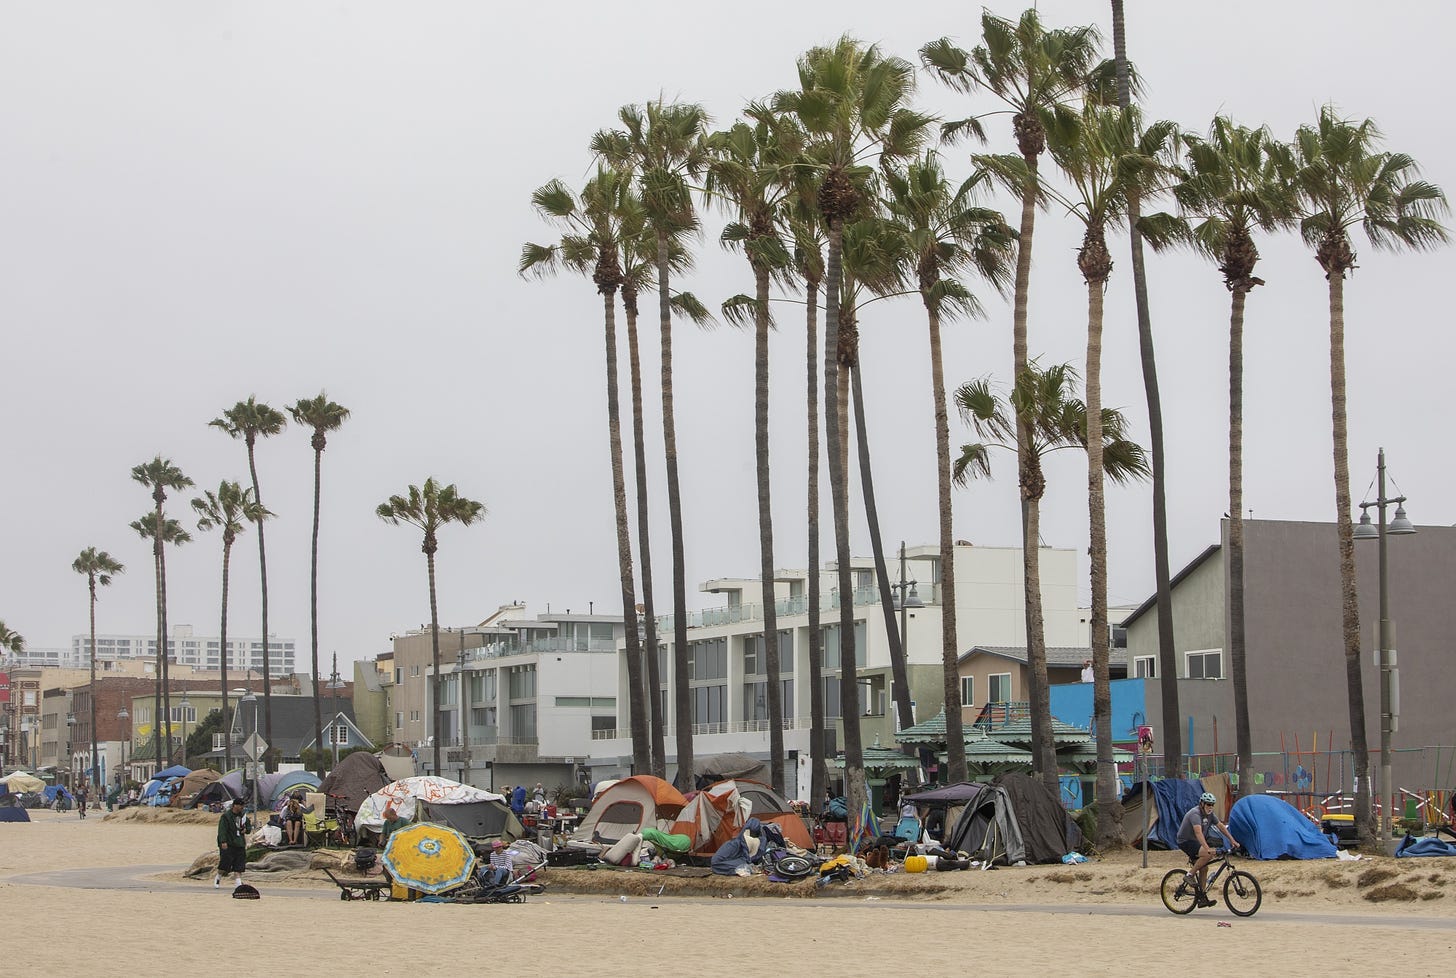 As Homelessness Surges, Venice Beach Debates Solutions - Bloomberg